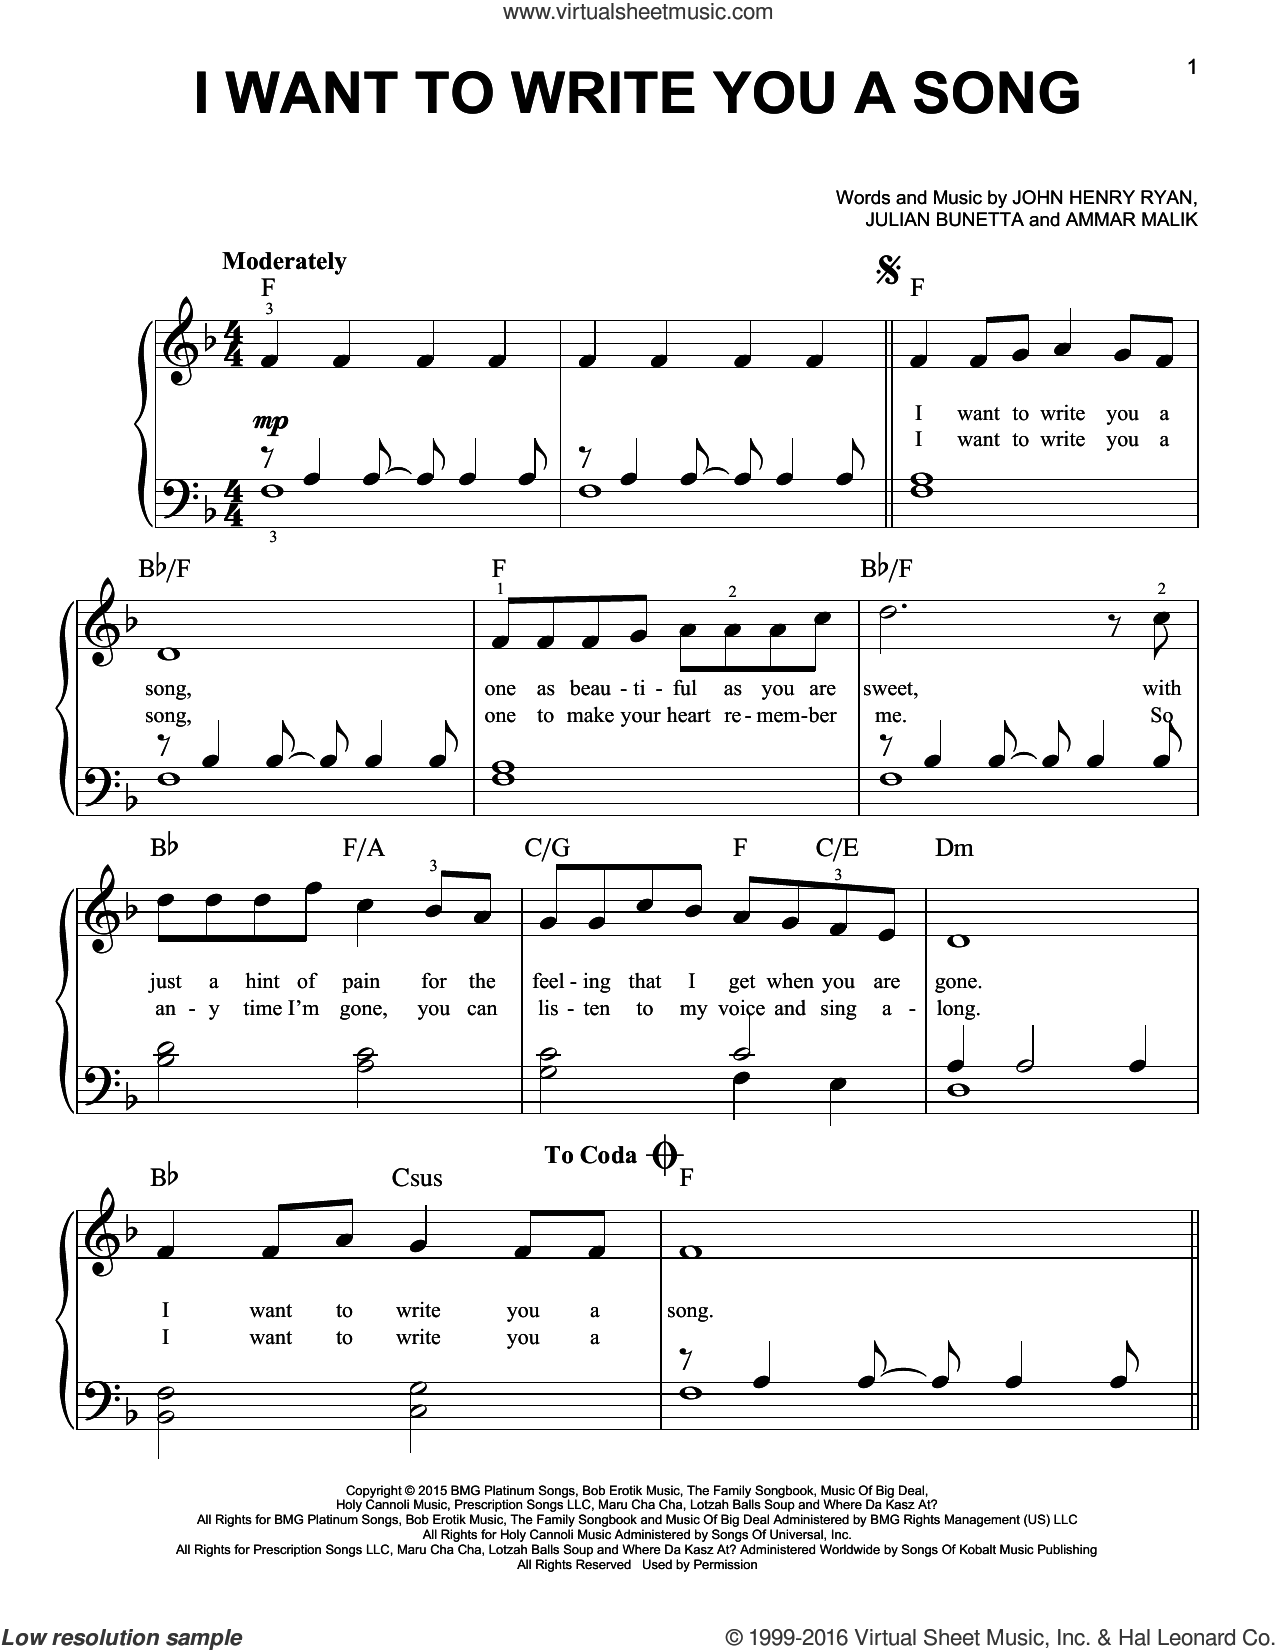 Direction - I Want To Write You A Song sheet music for piano solo